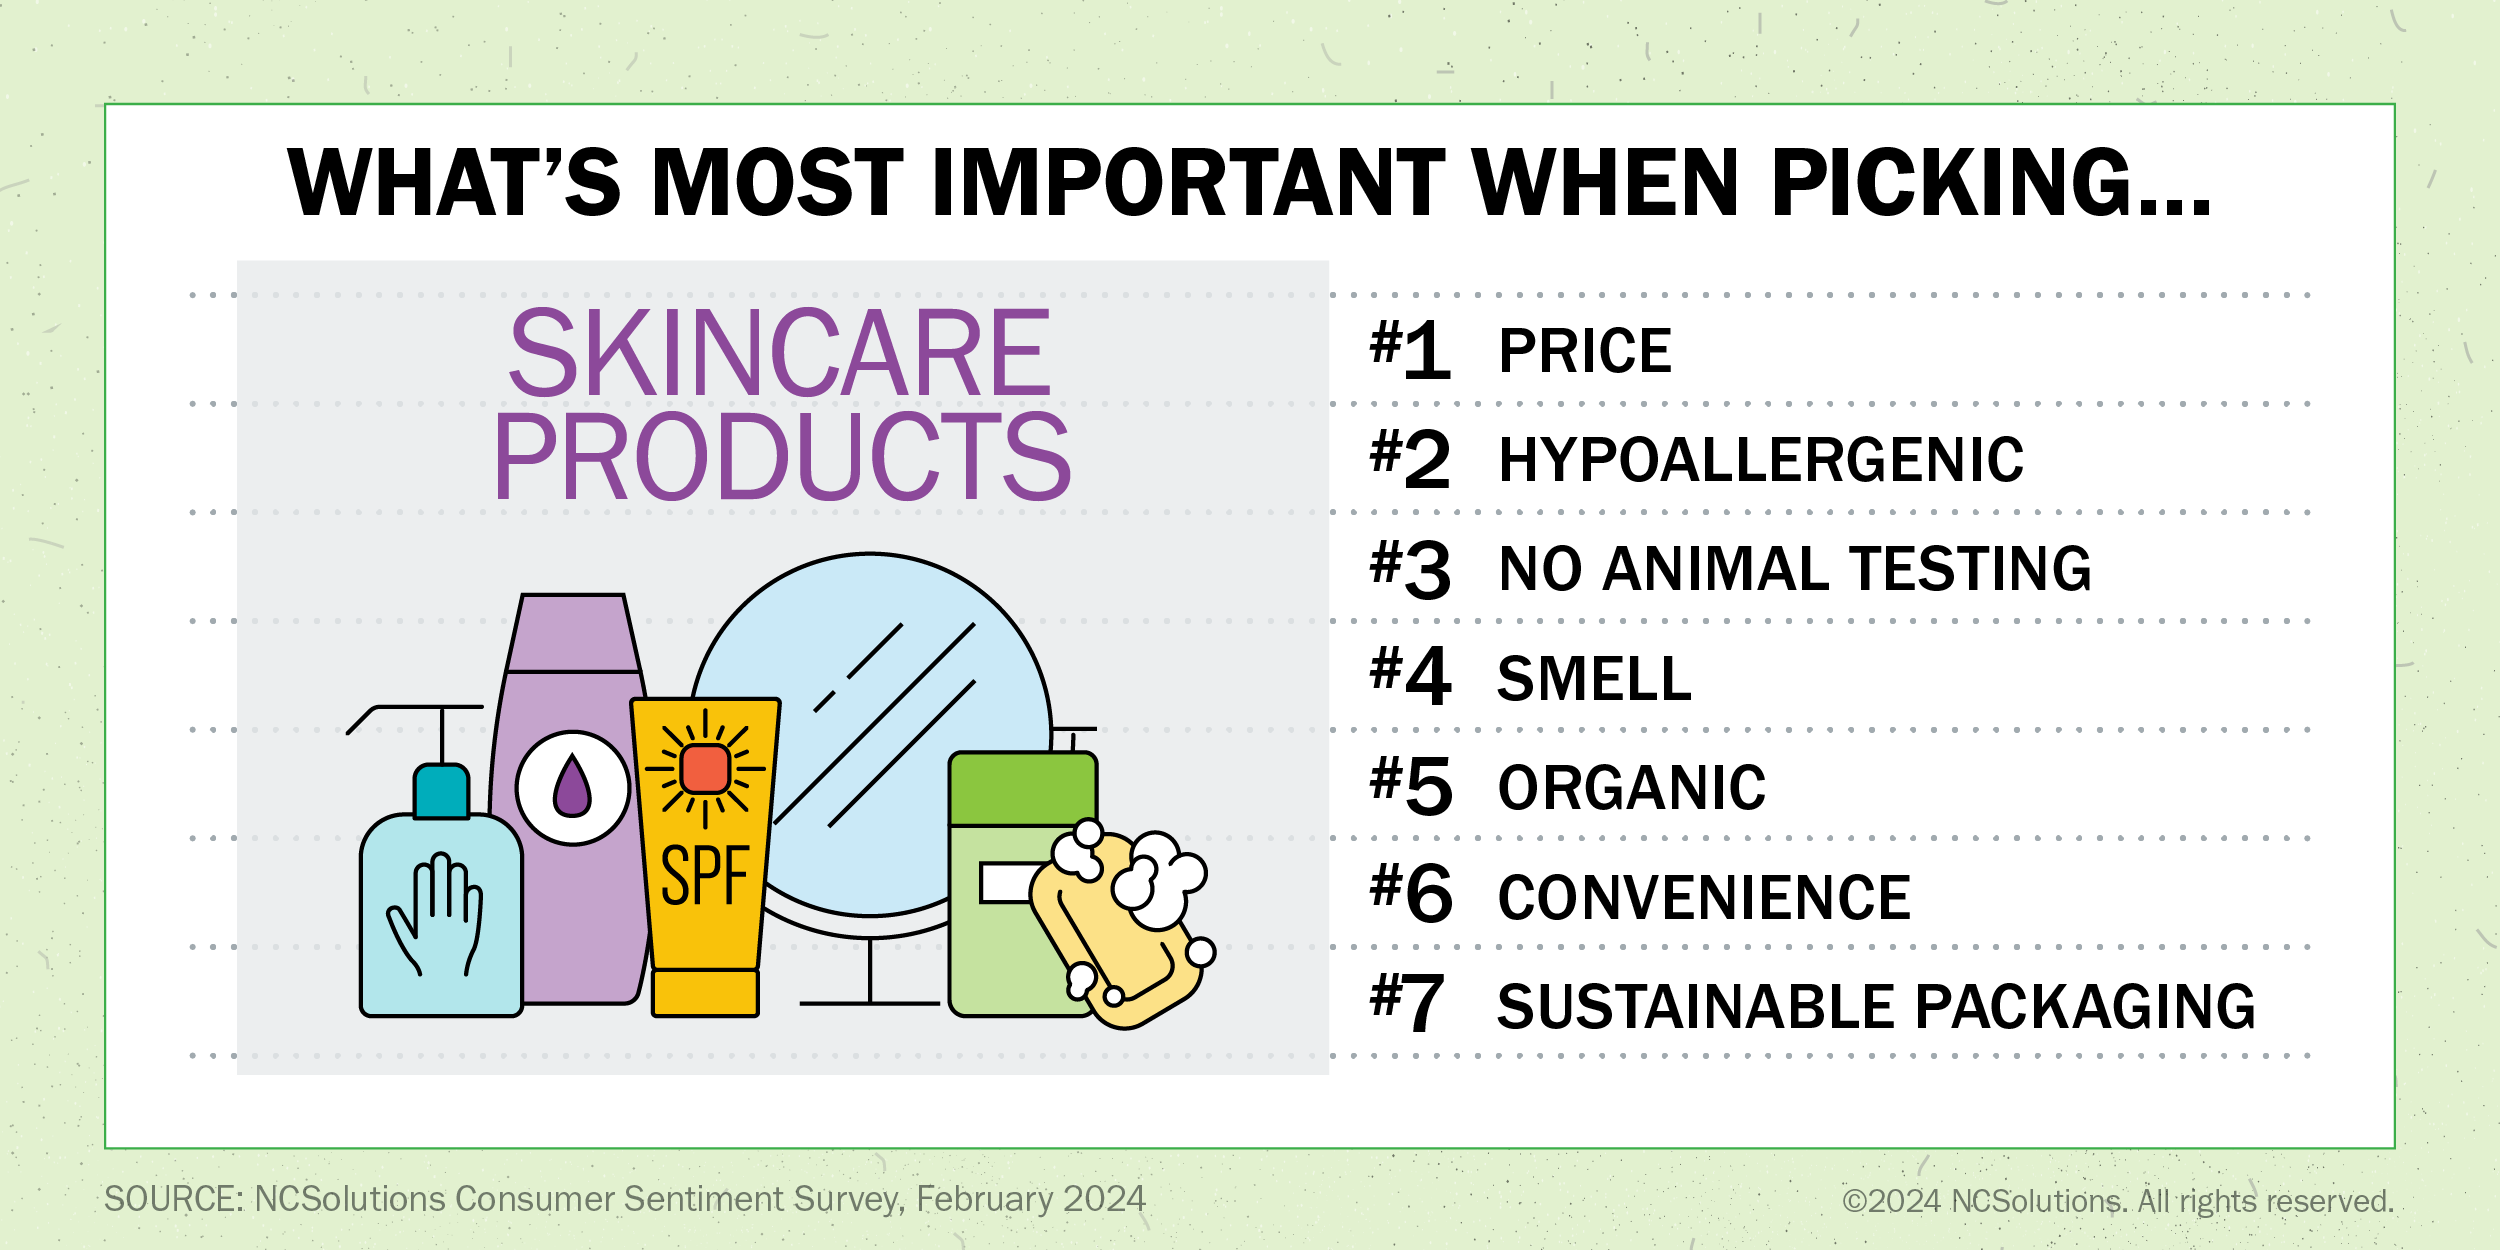 Price and hypoallergenic are the top two most important when picking skincare products.